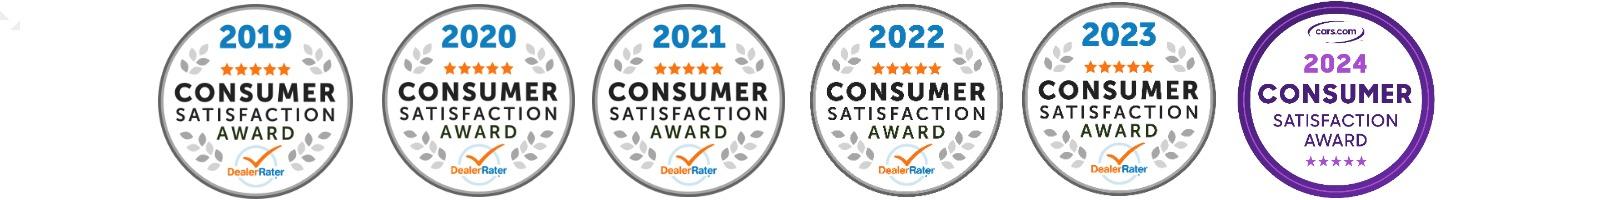 CONSUMER SATISFACTION AWARD Know More